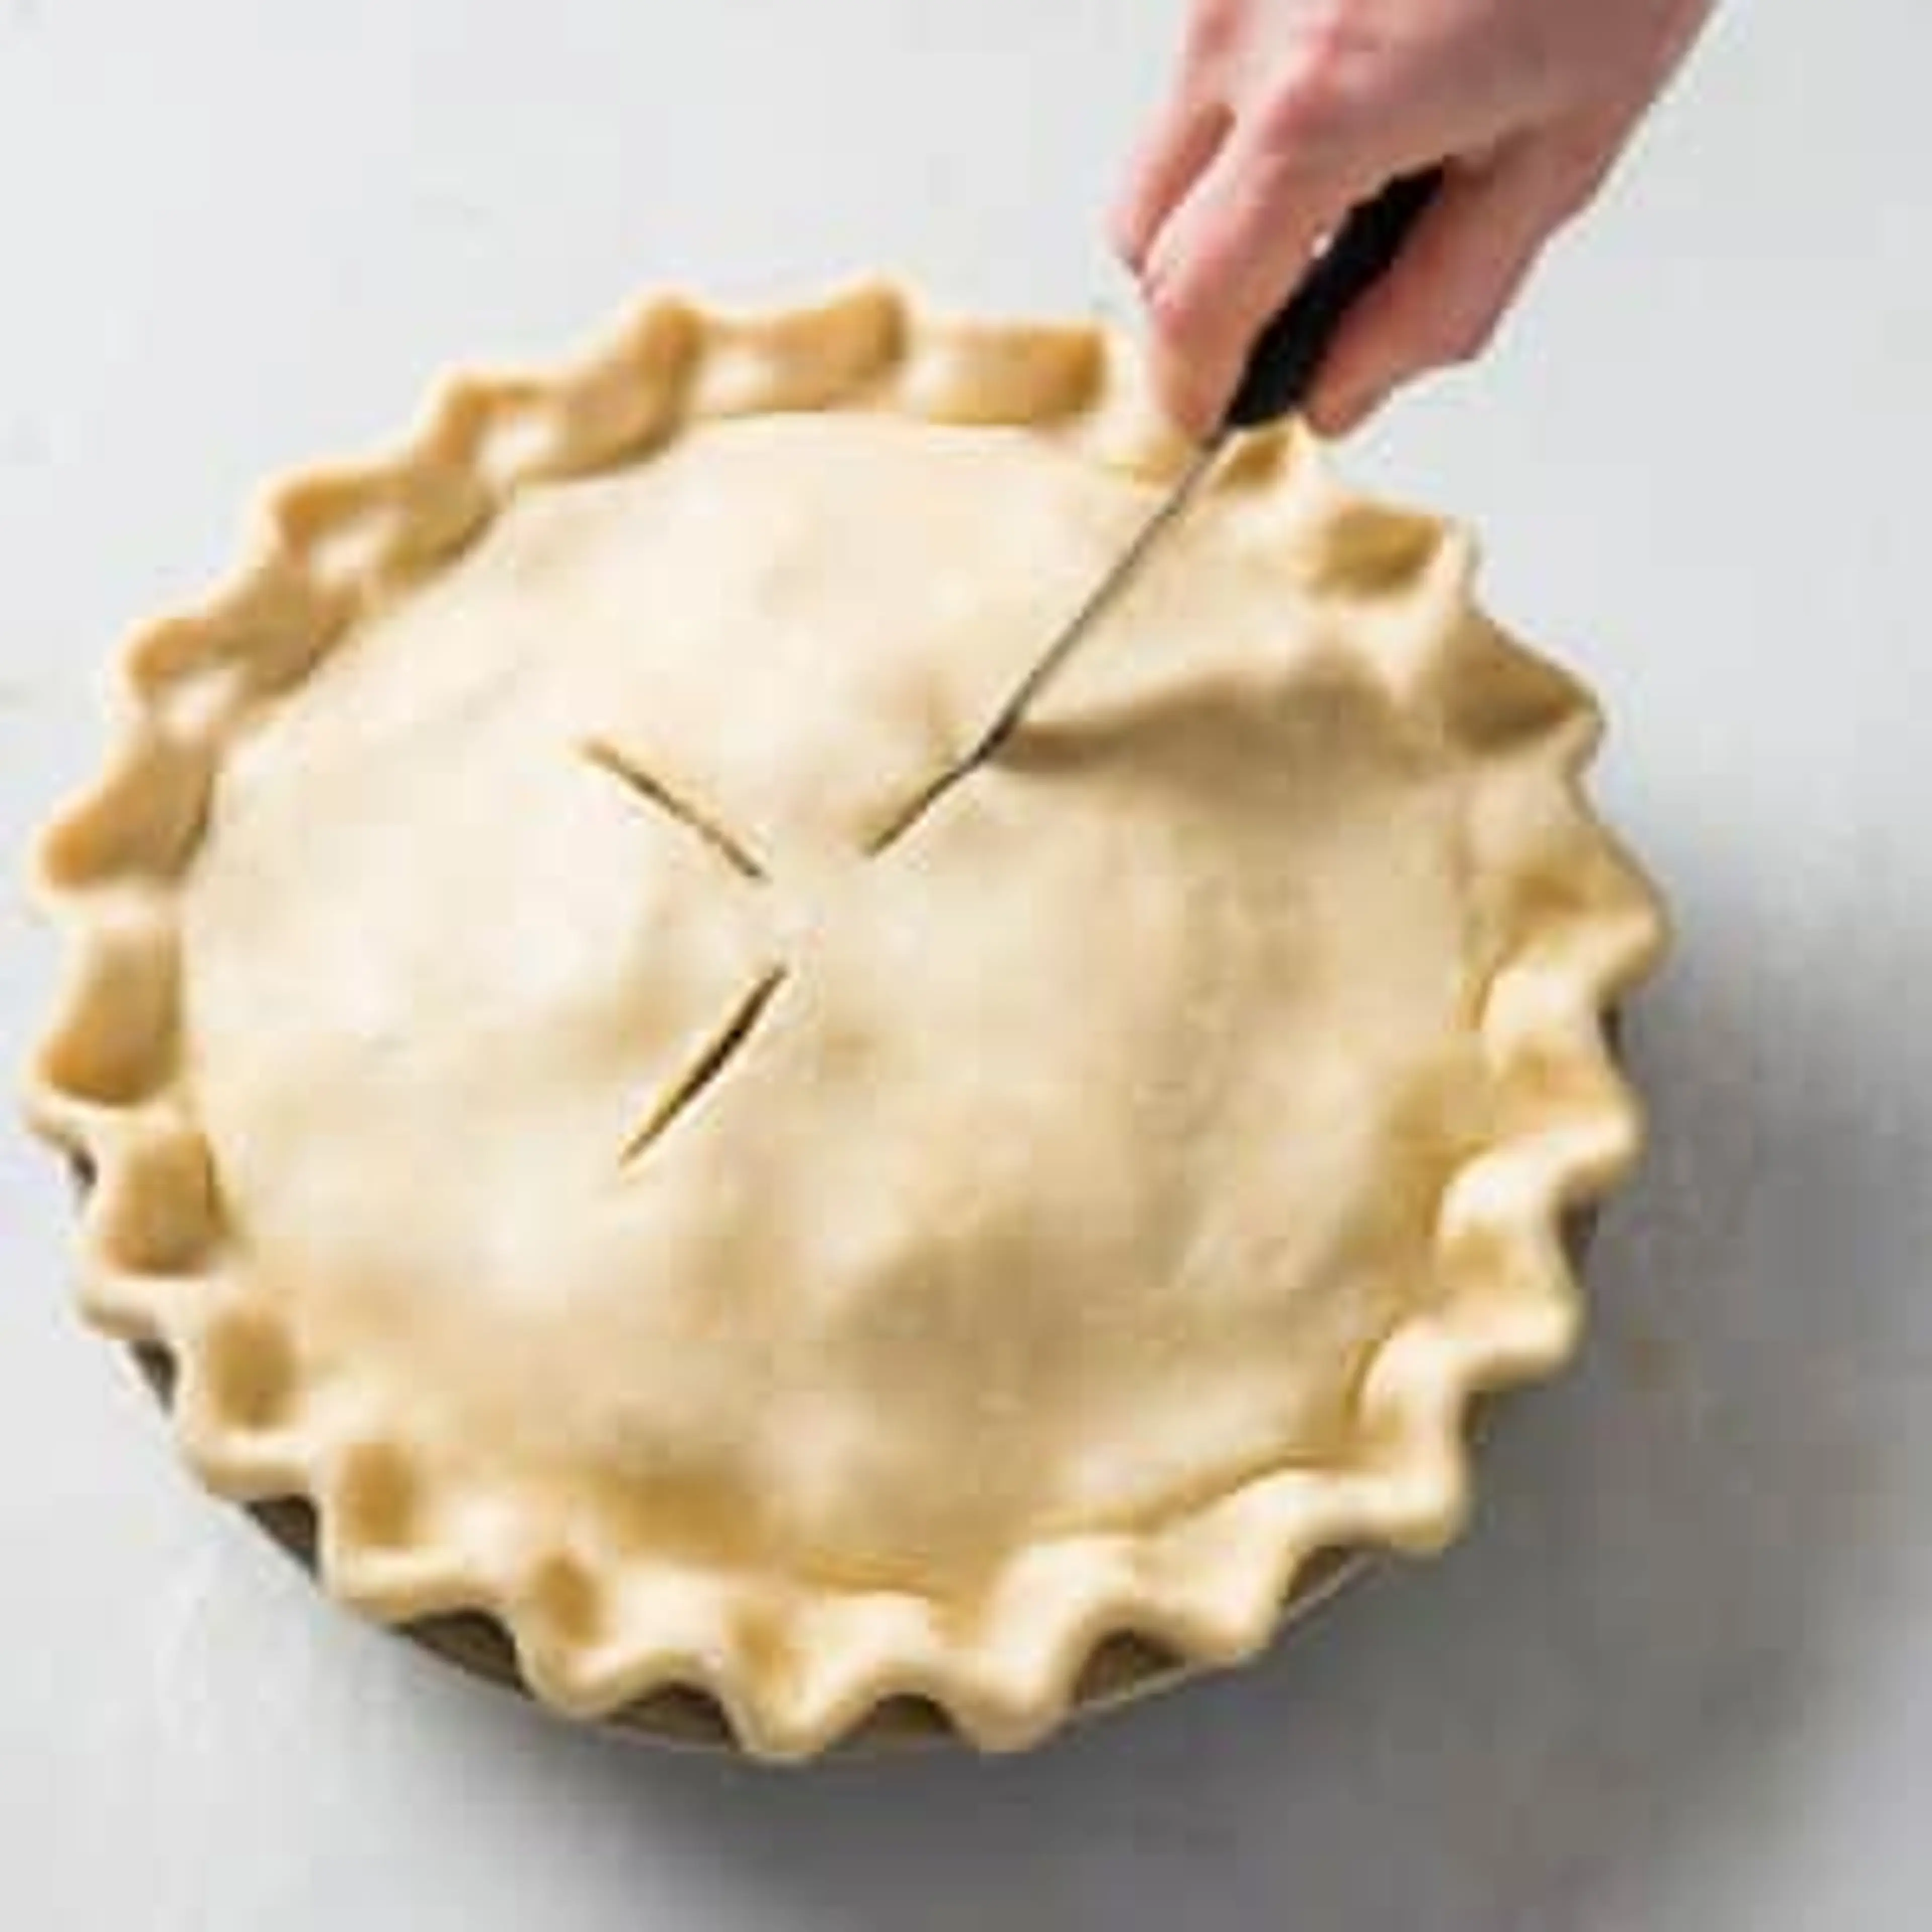 Foolproof All-Butter Dough for Double-Crust Pie